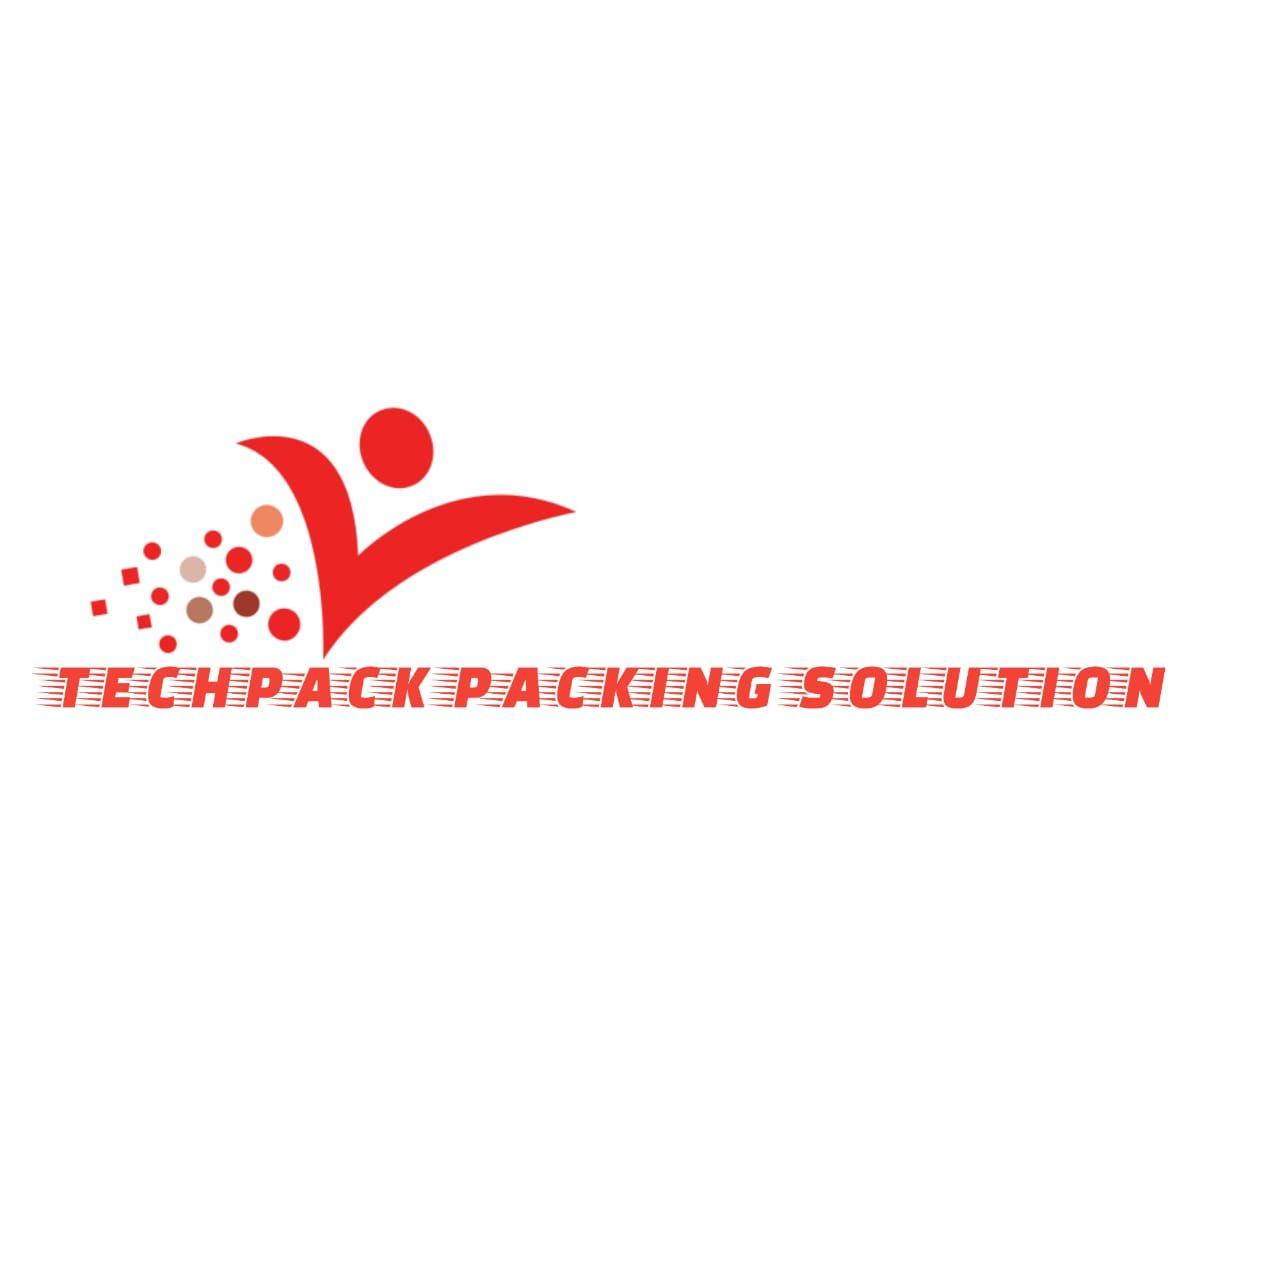 TECHPACK PACKING SOLUTION